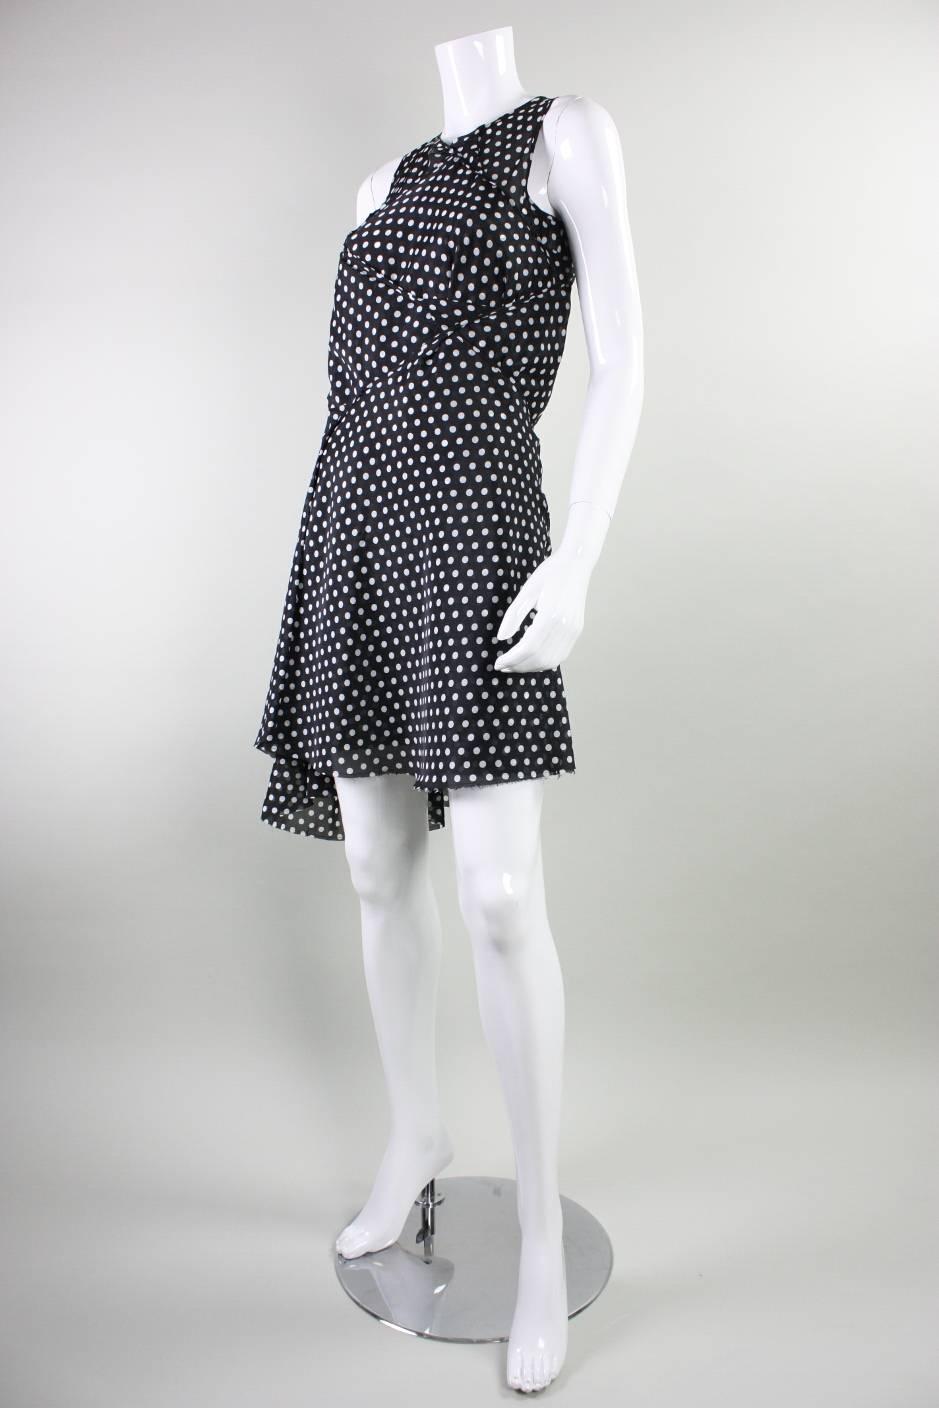 2003 Comme des Garcons Dotted Asymmetrical Dress In Excellent Condition For Sale In Los Angeles, CA